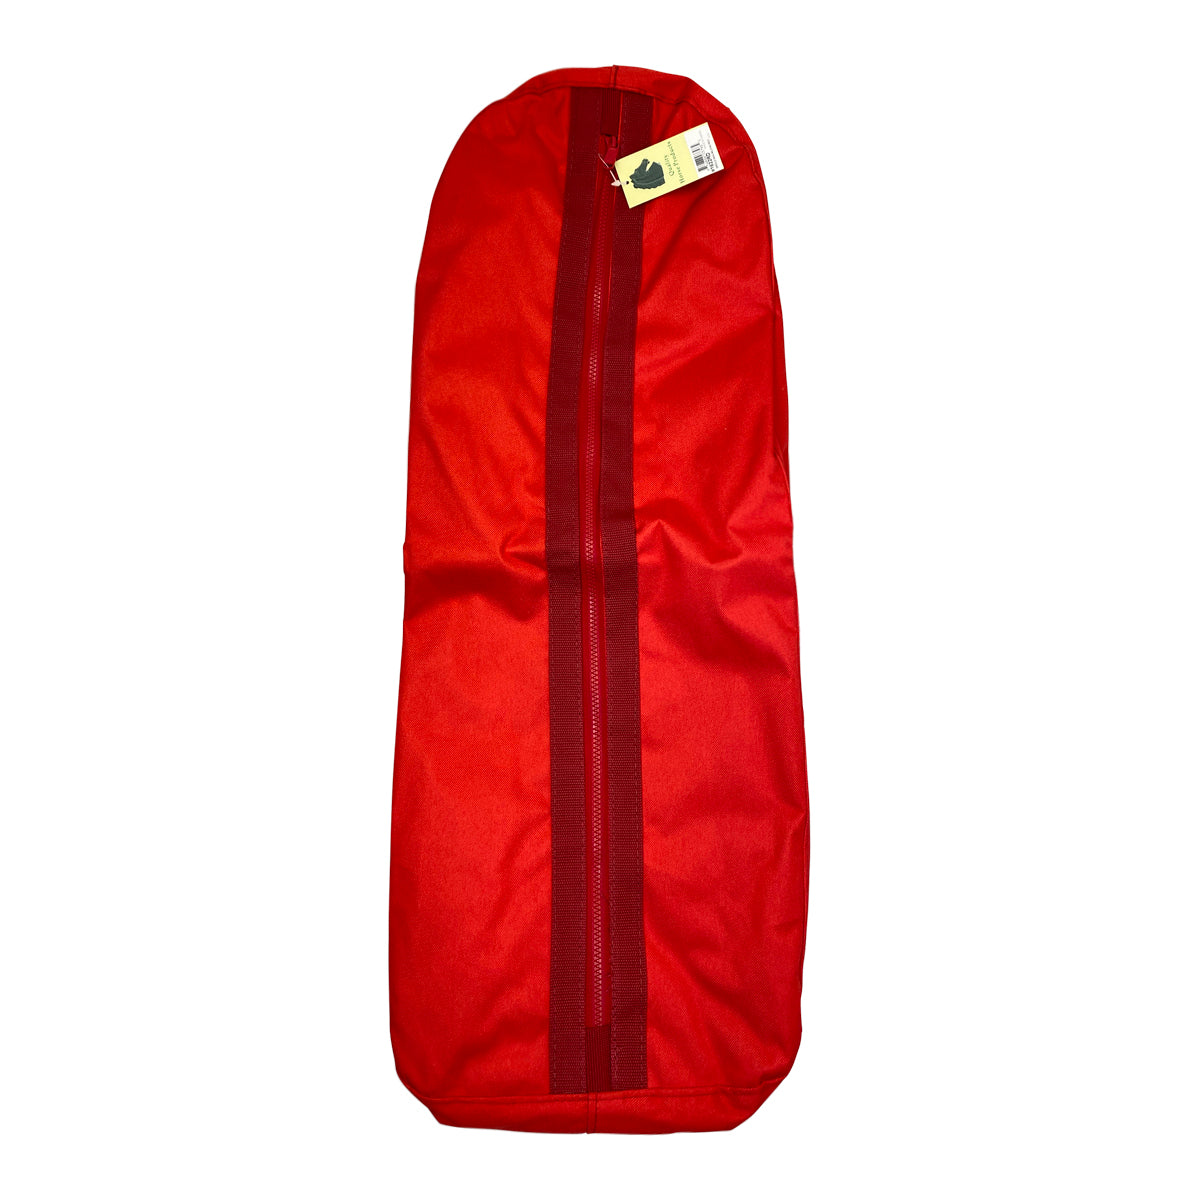 Bridle Bag in Red